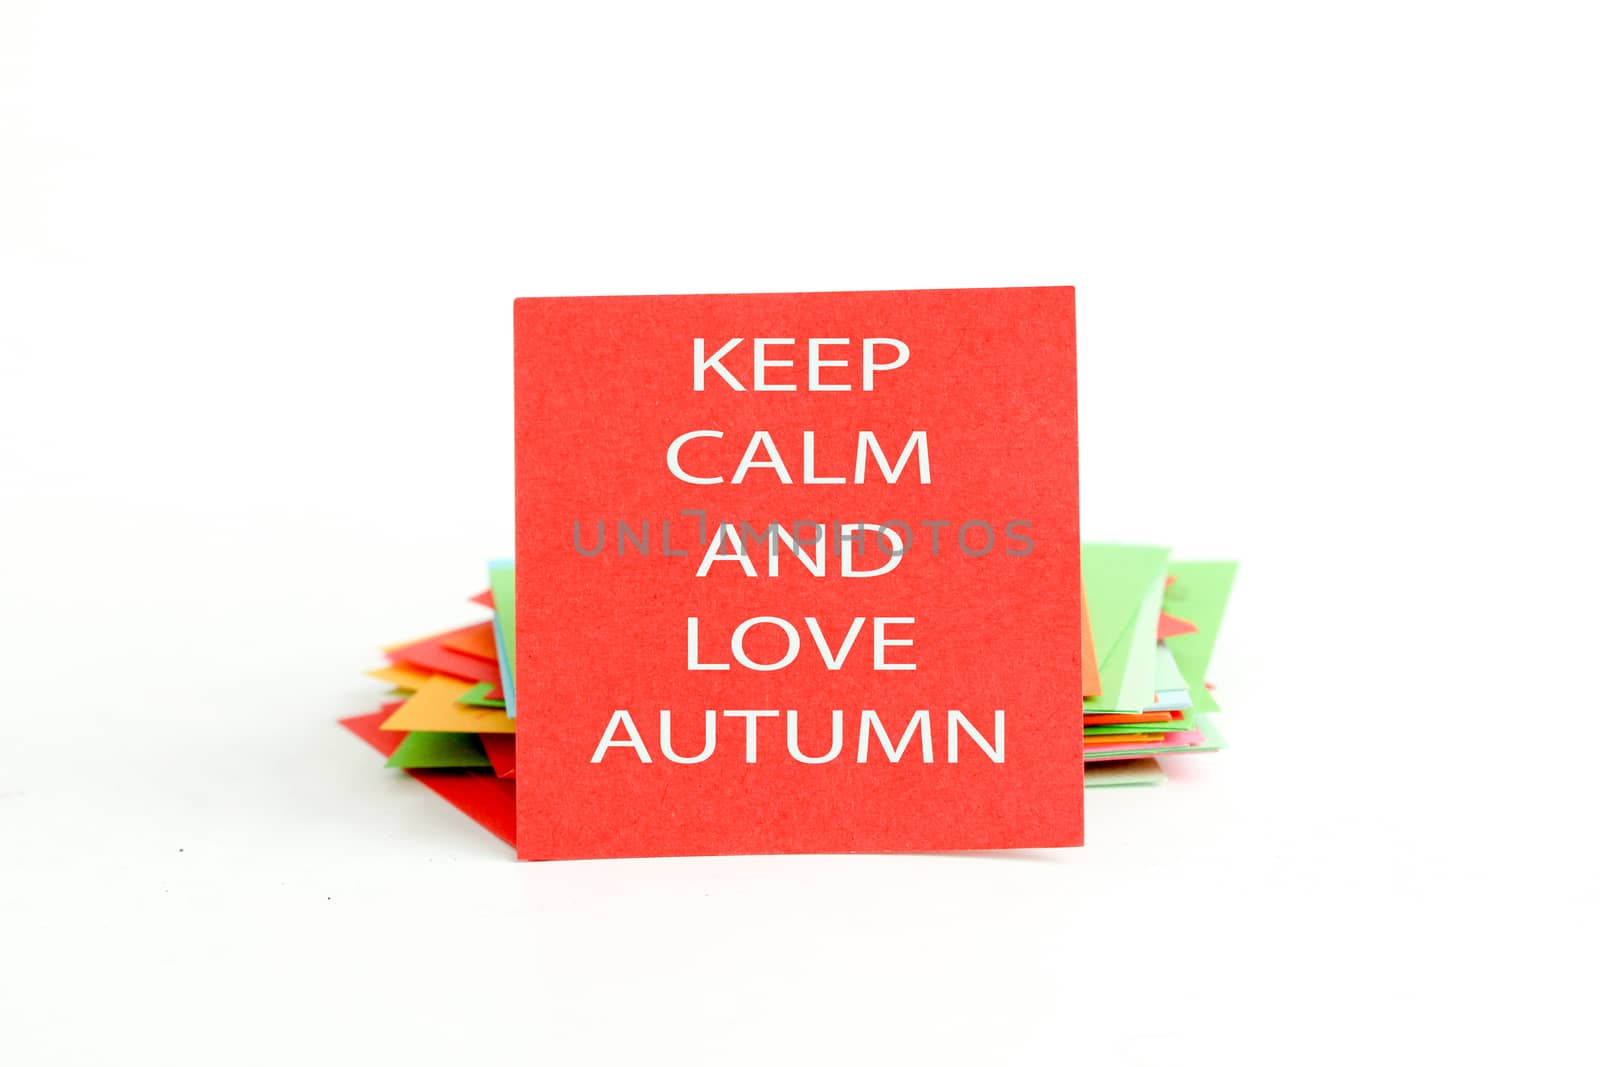 picture of a red note paper with text keep calm and love autumn